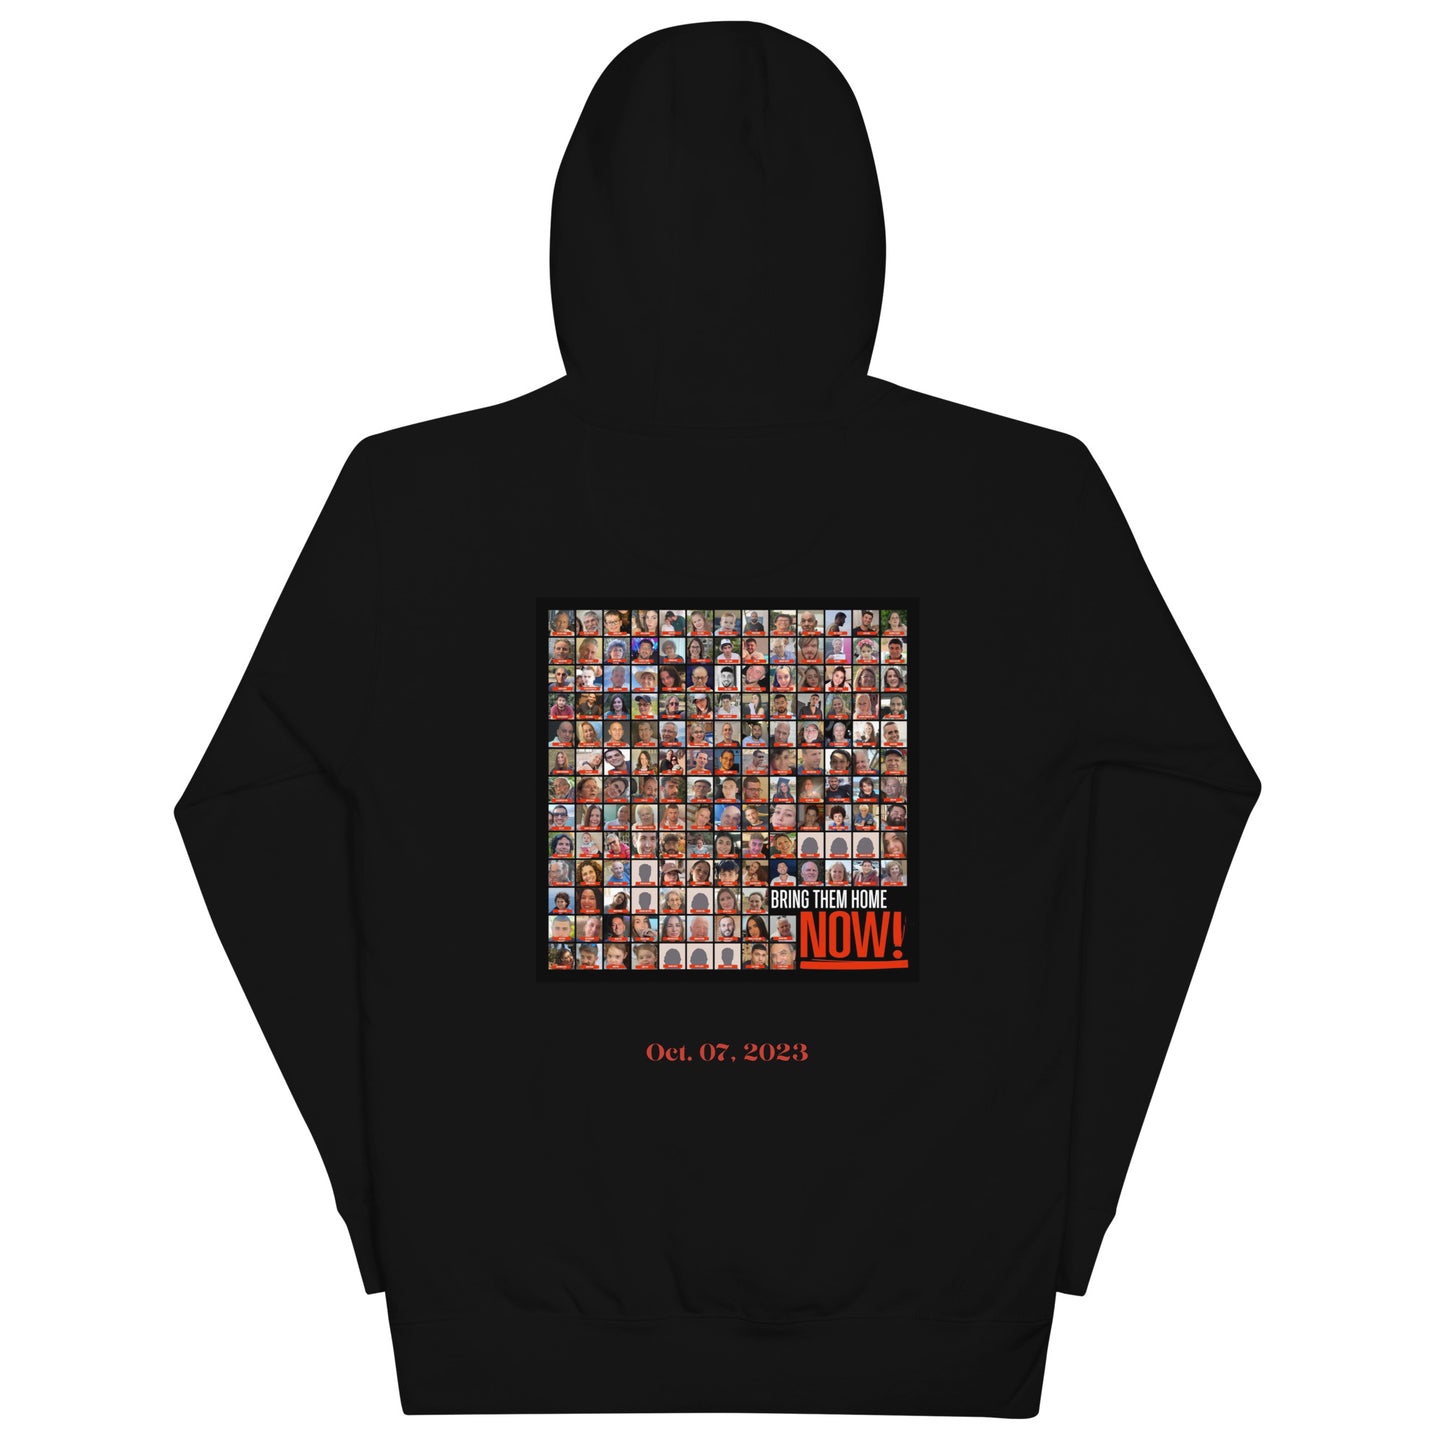 #BringThemHome #1 - Unisex Hoodie (6 colors)